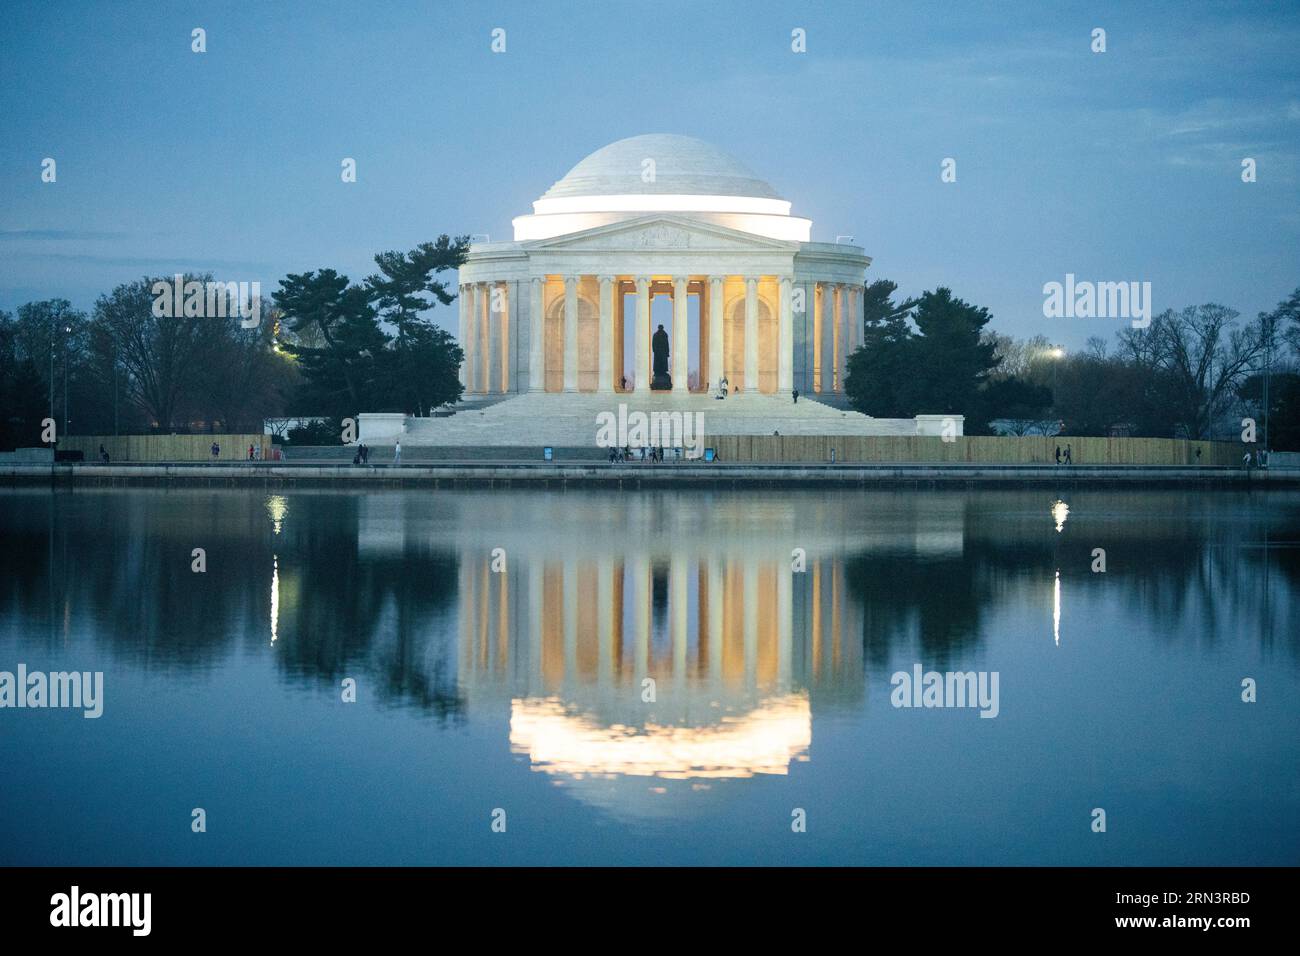 WASHINGTON DC, United States — The Jefferson Memorial stands as an iconic tribute to the third U.S. President, Thomas Jefferson. Overlooking the Tidal Basin, this neoclassical monument is a testament to Jefferson's contributions to the founding principles of the nation. Stock Photo